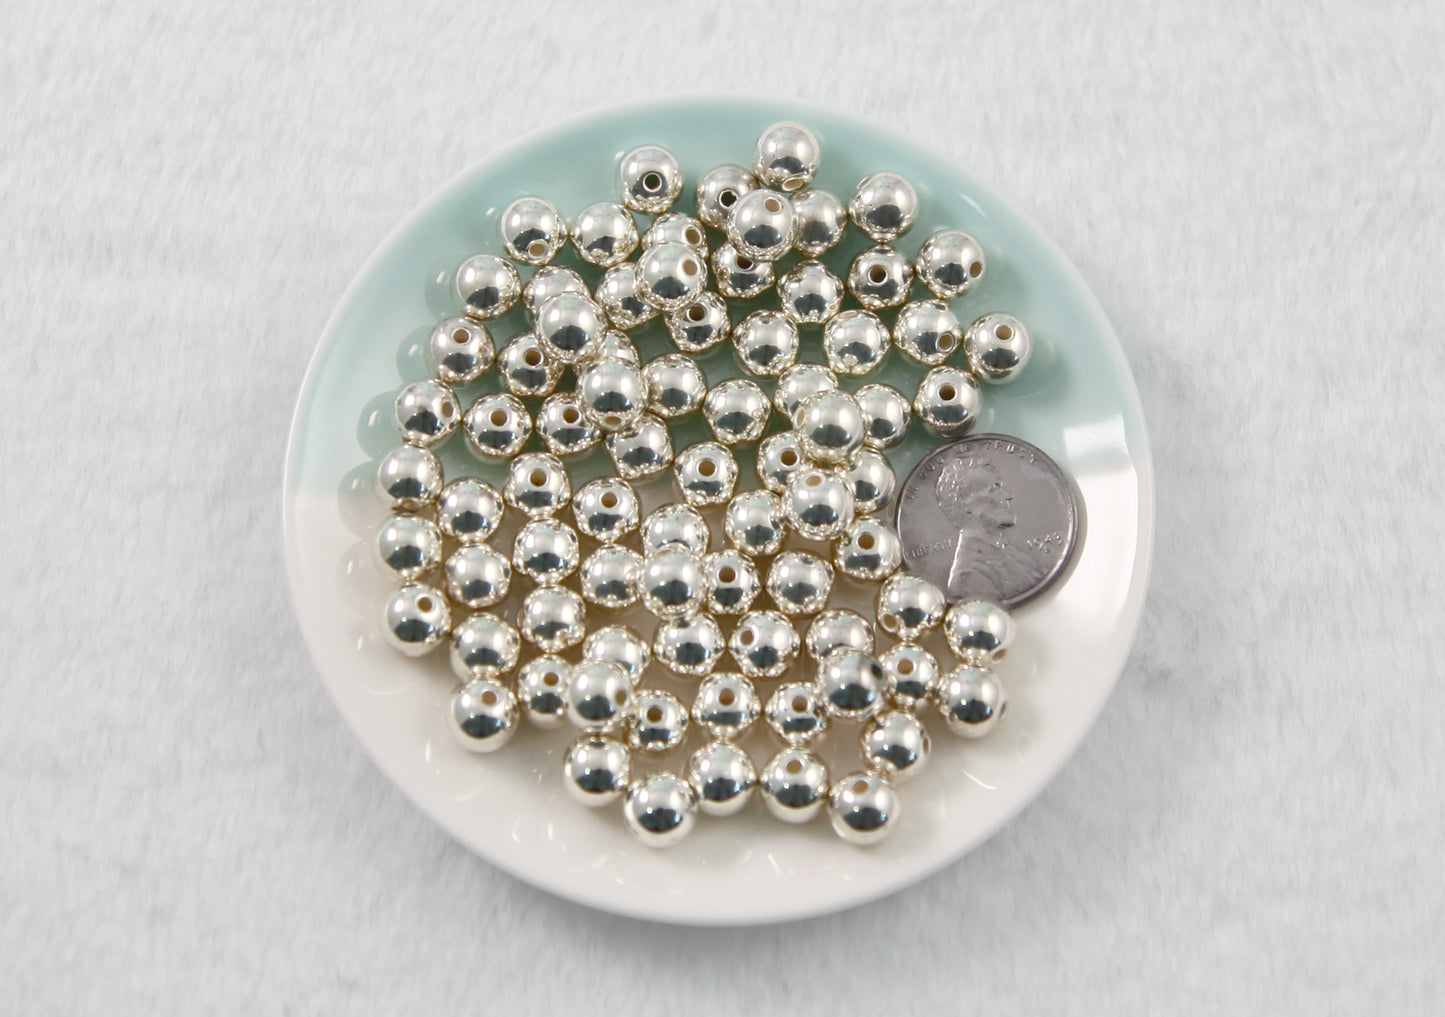 Electroplated Round Beads - 100 pcs - 8mm Electroplated Silver Plastic Spacer Beads - Super Lightweight - Easily to use in jewelry